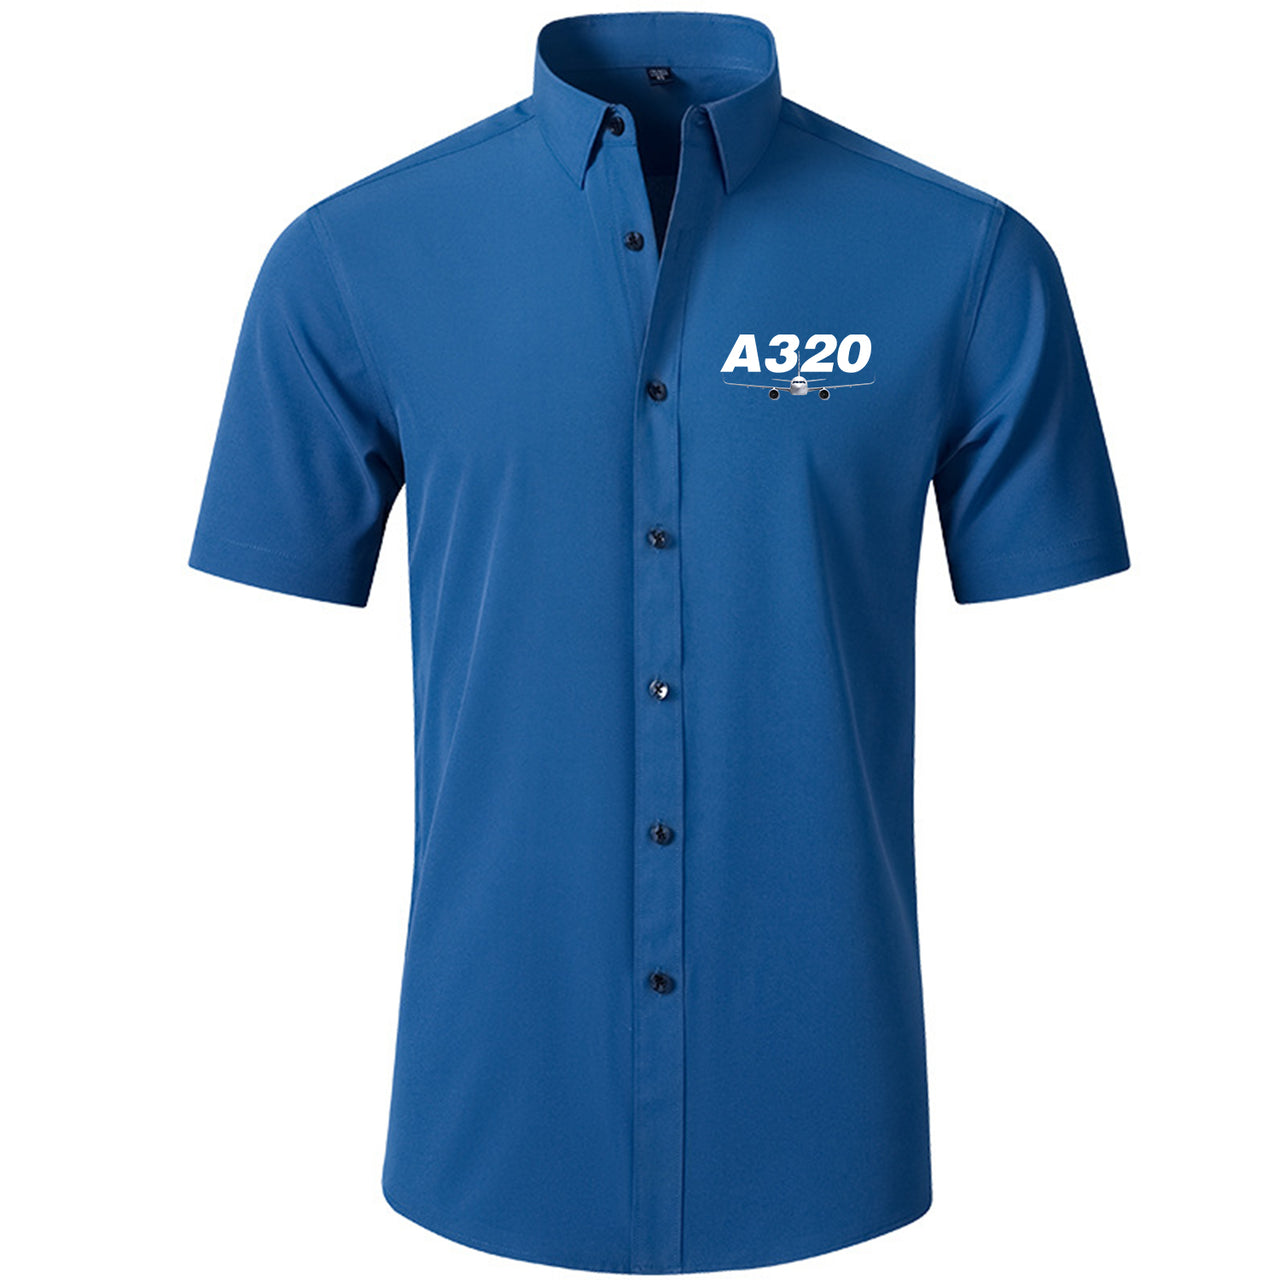 Super Airbus A320 Designed Short Sleeve Shirts